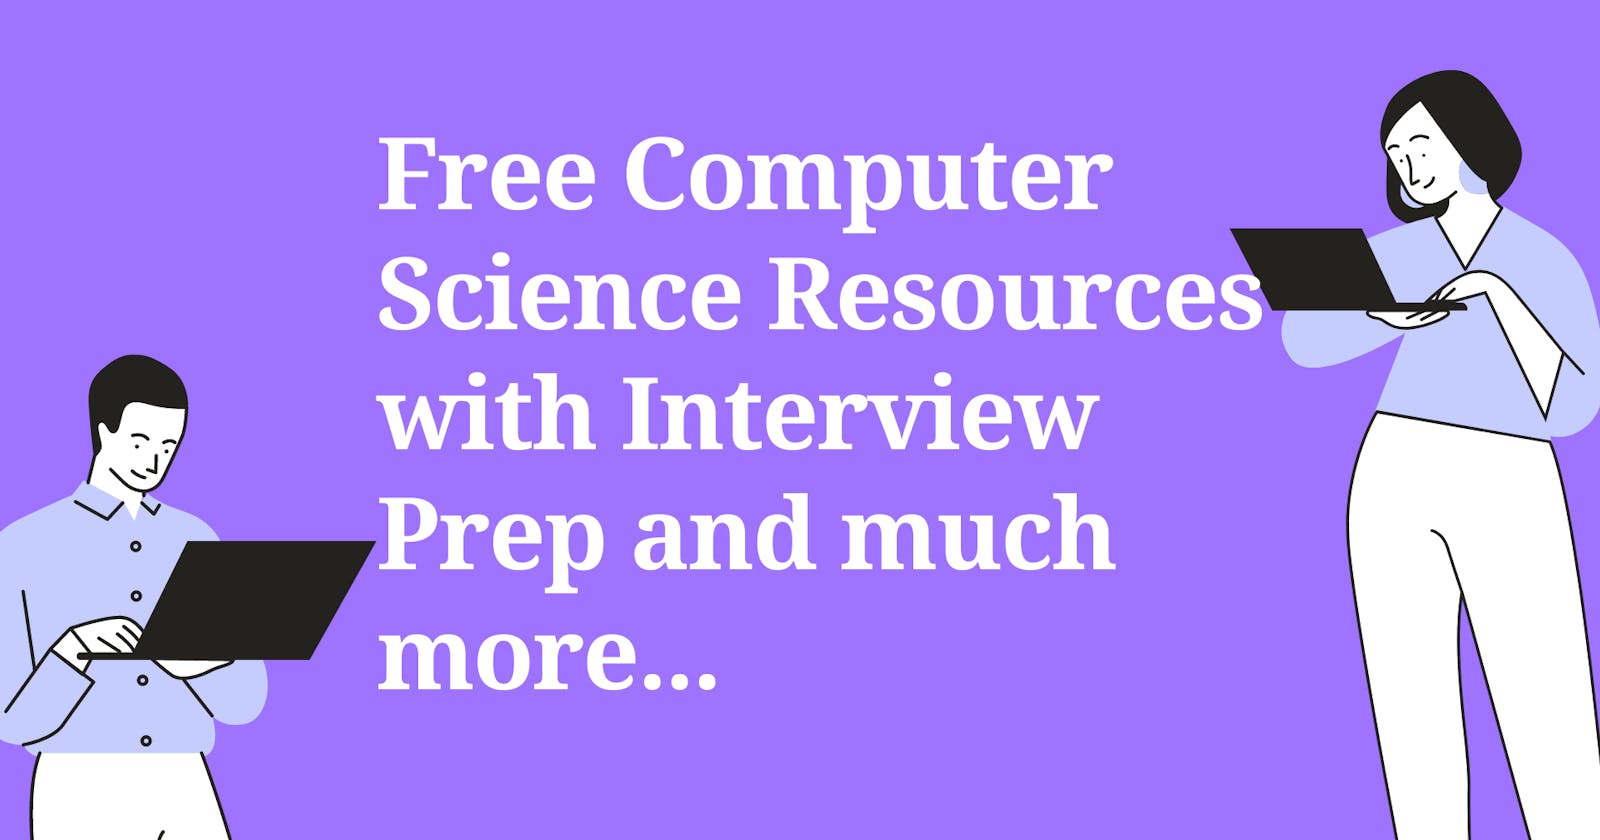 Free Computer Science Resources with Interview Prep and much more...